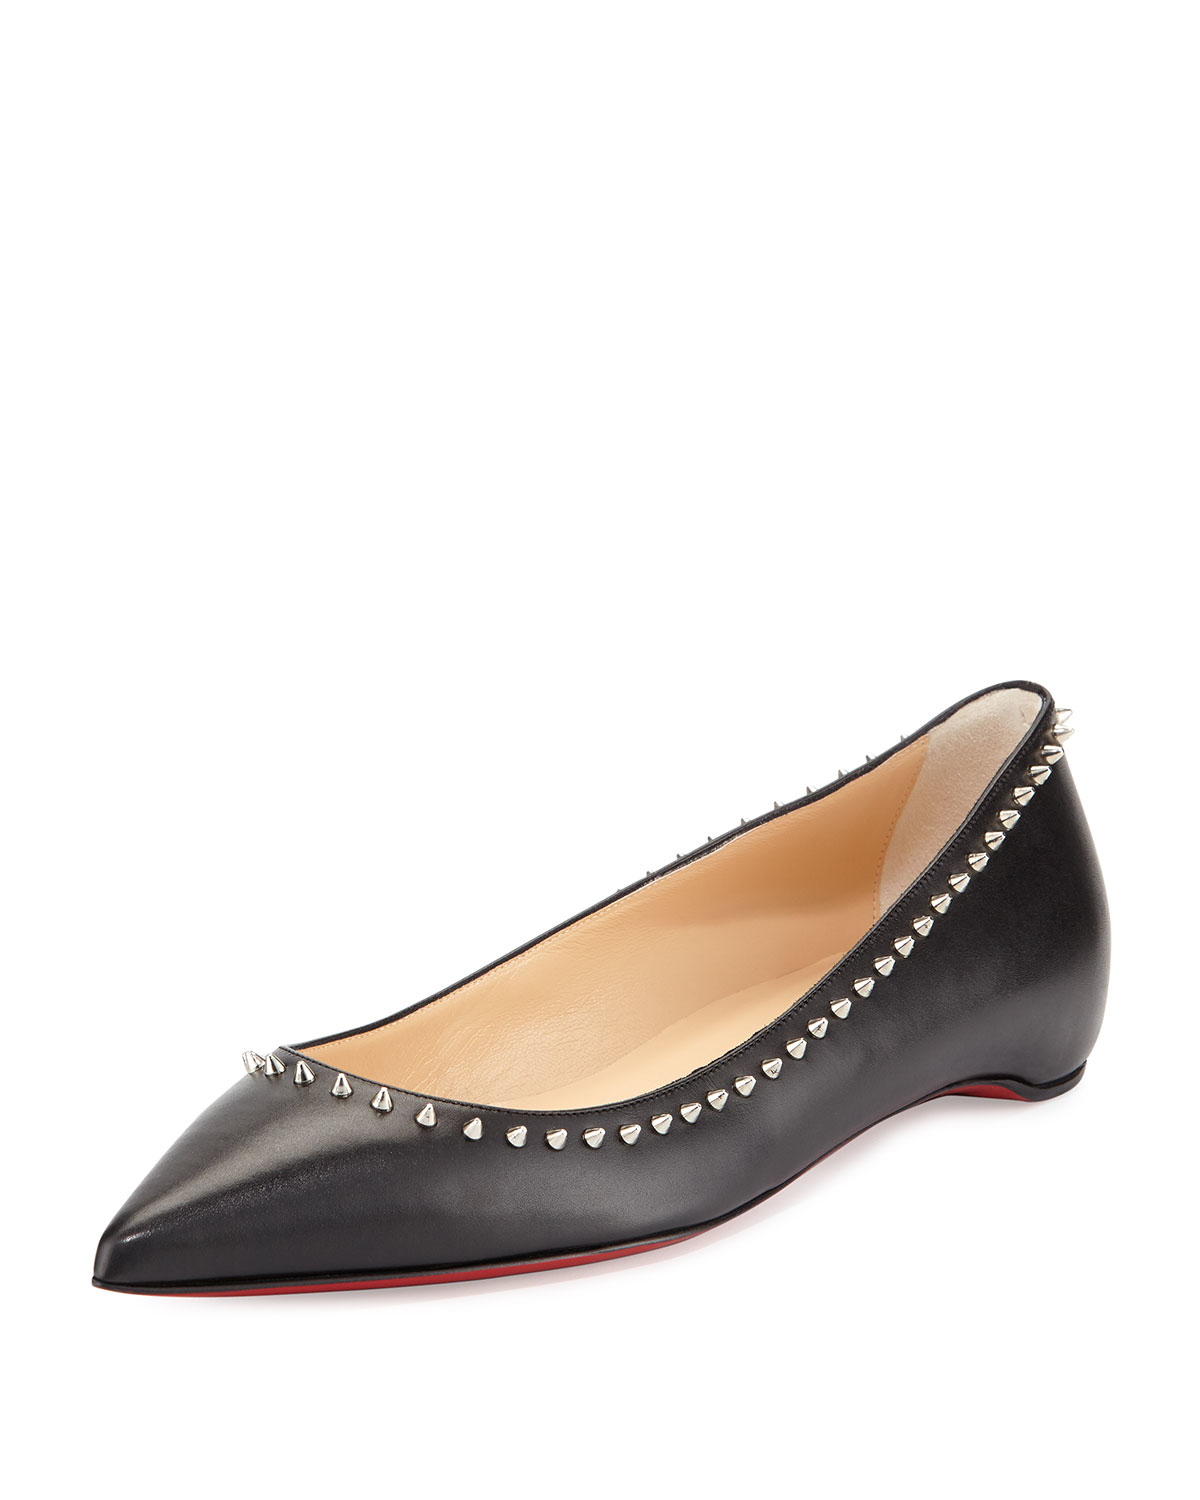 Christian louboutin Anjalina Studded Leather Ballet Flats in Beige ...